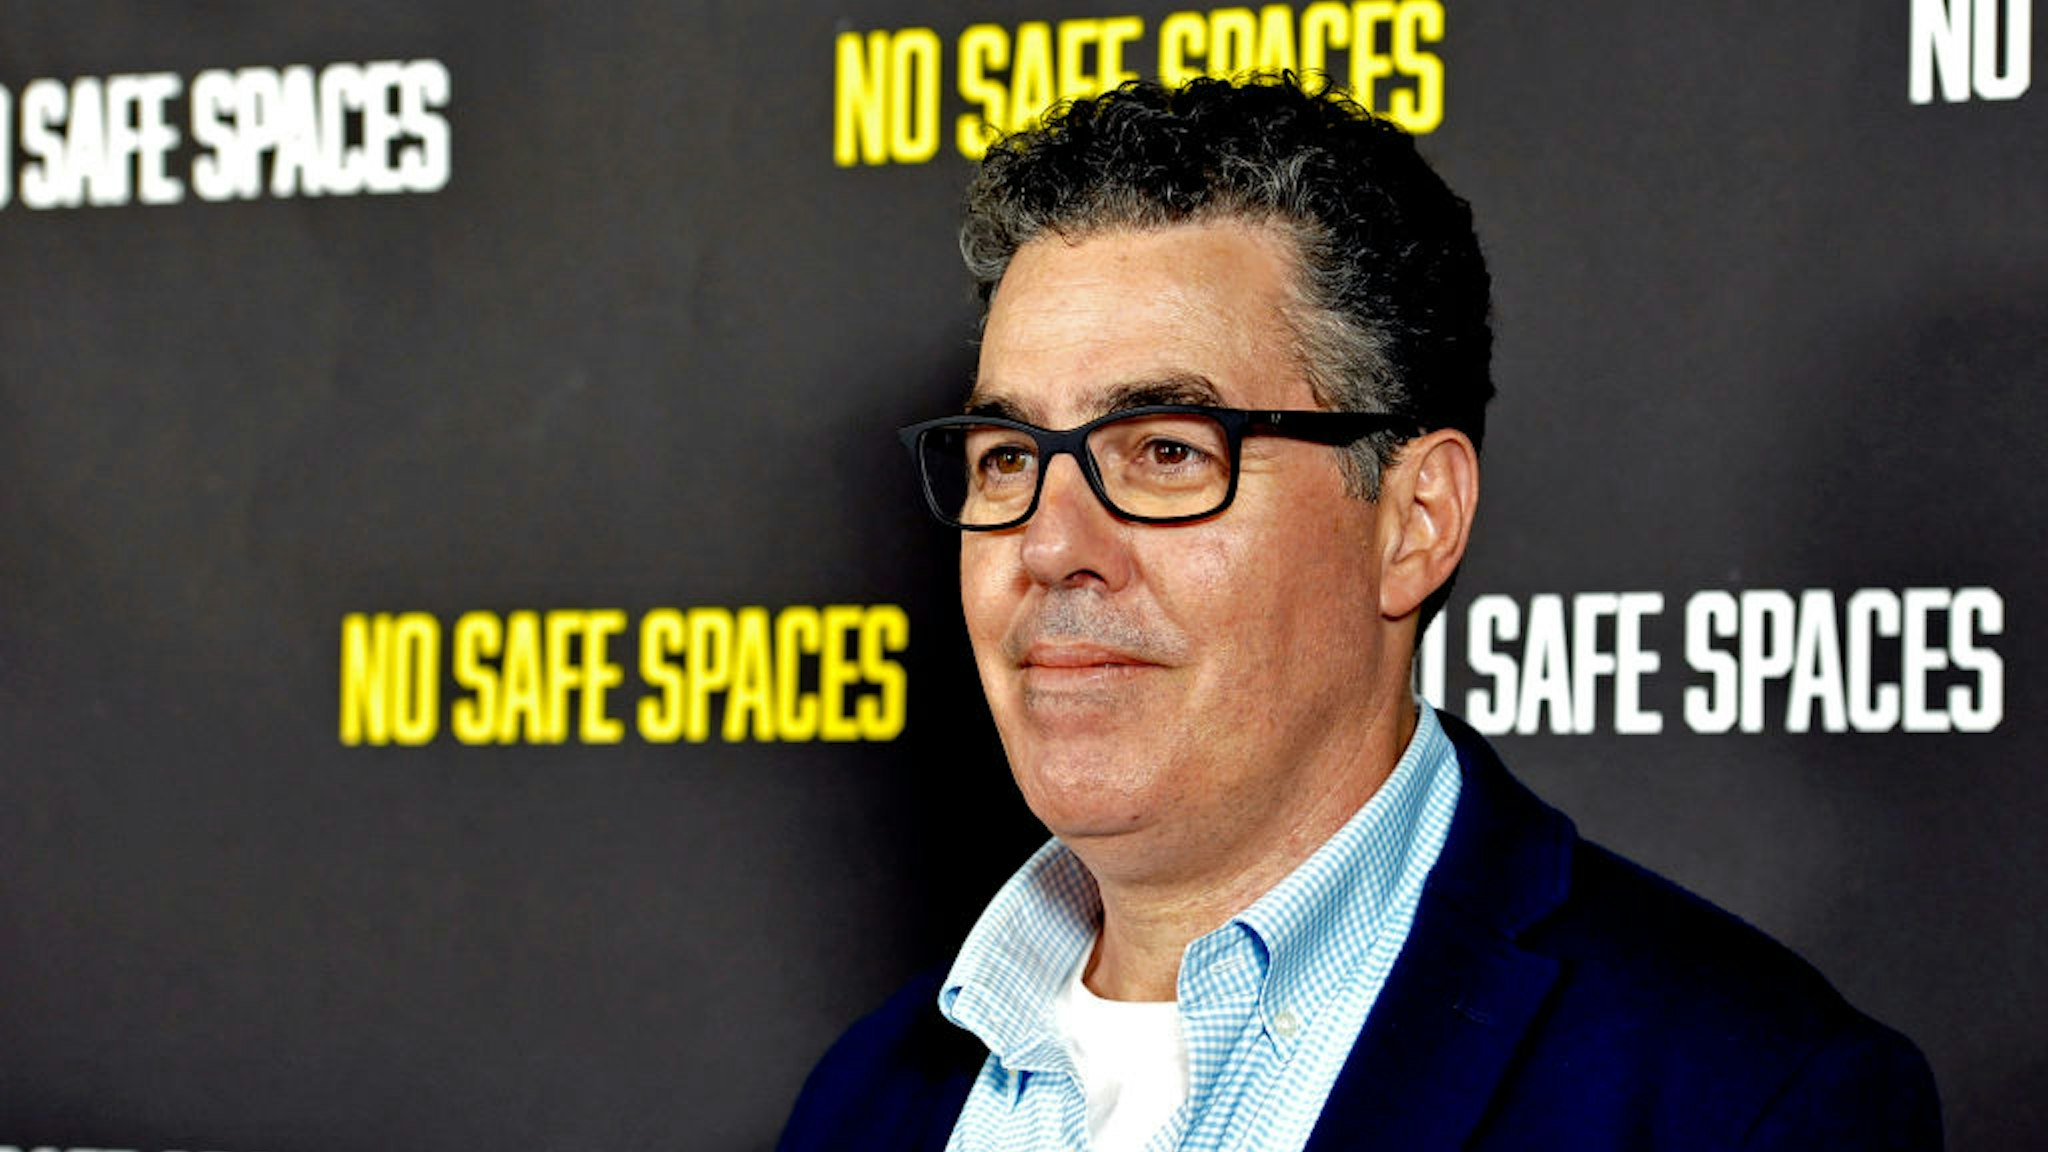 HOLLYWOOD, CALIFORNIA - NOVEMBER 11: Actor Adam Carolla attends the premiere of the film "No Safe Spaces" at TCL Chinese Theatre on November 11, 2019 in Hollywood, California. (Photo by Michael Tullberg/Getty Images)